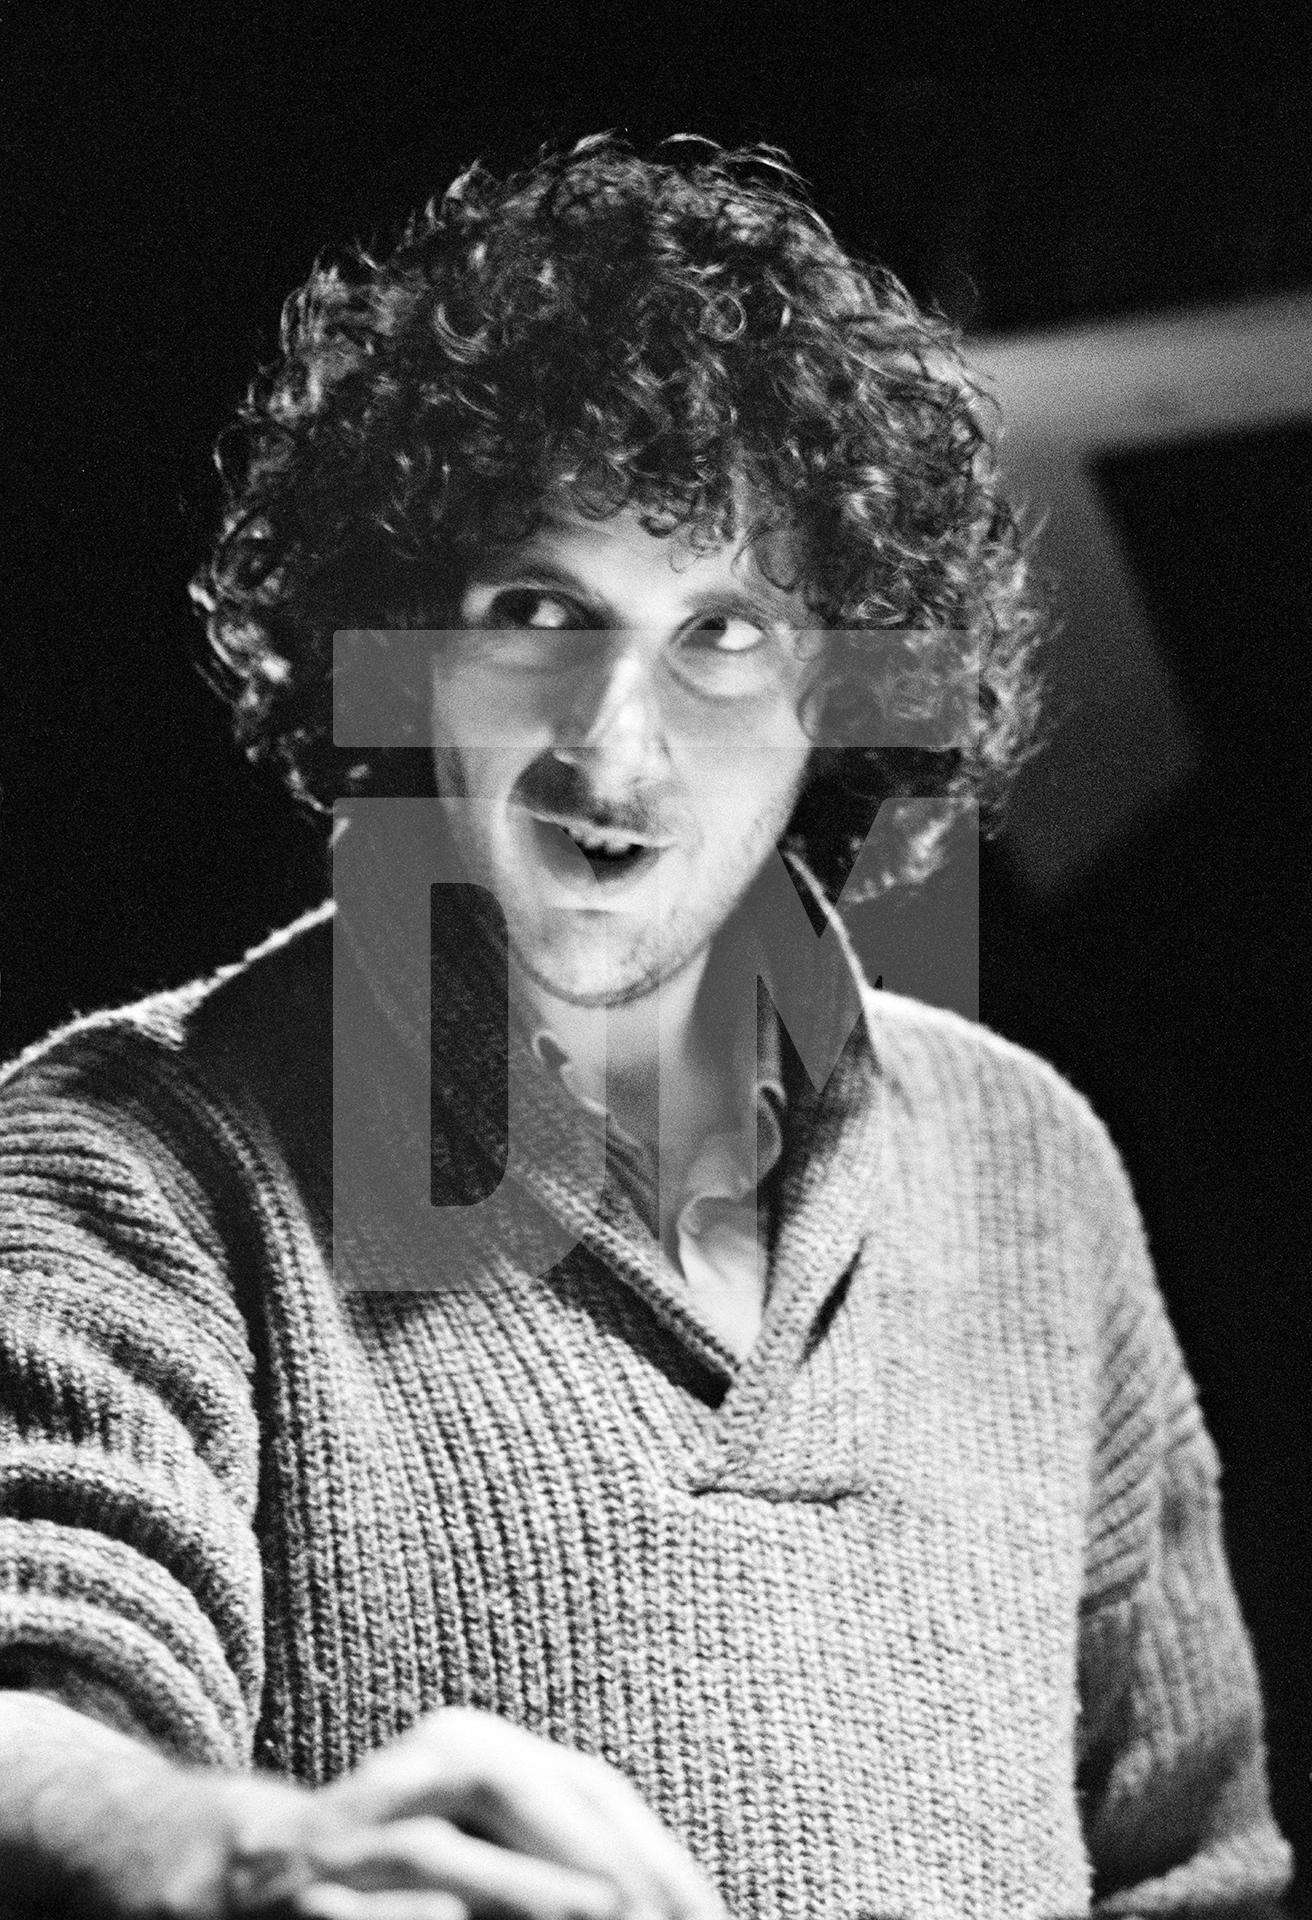 Martin Hannett, Factory producer at Pennine Sound Studio, Oldham. January 1980 by Daniel Meadows